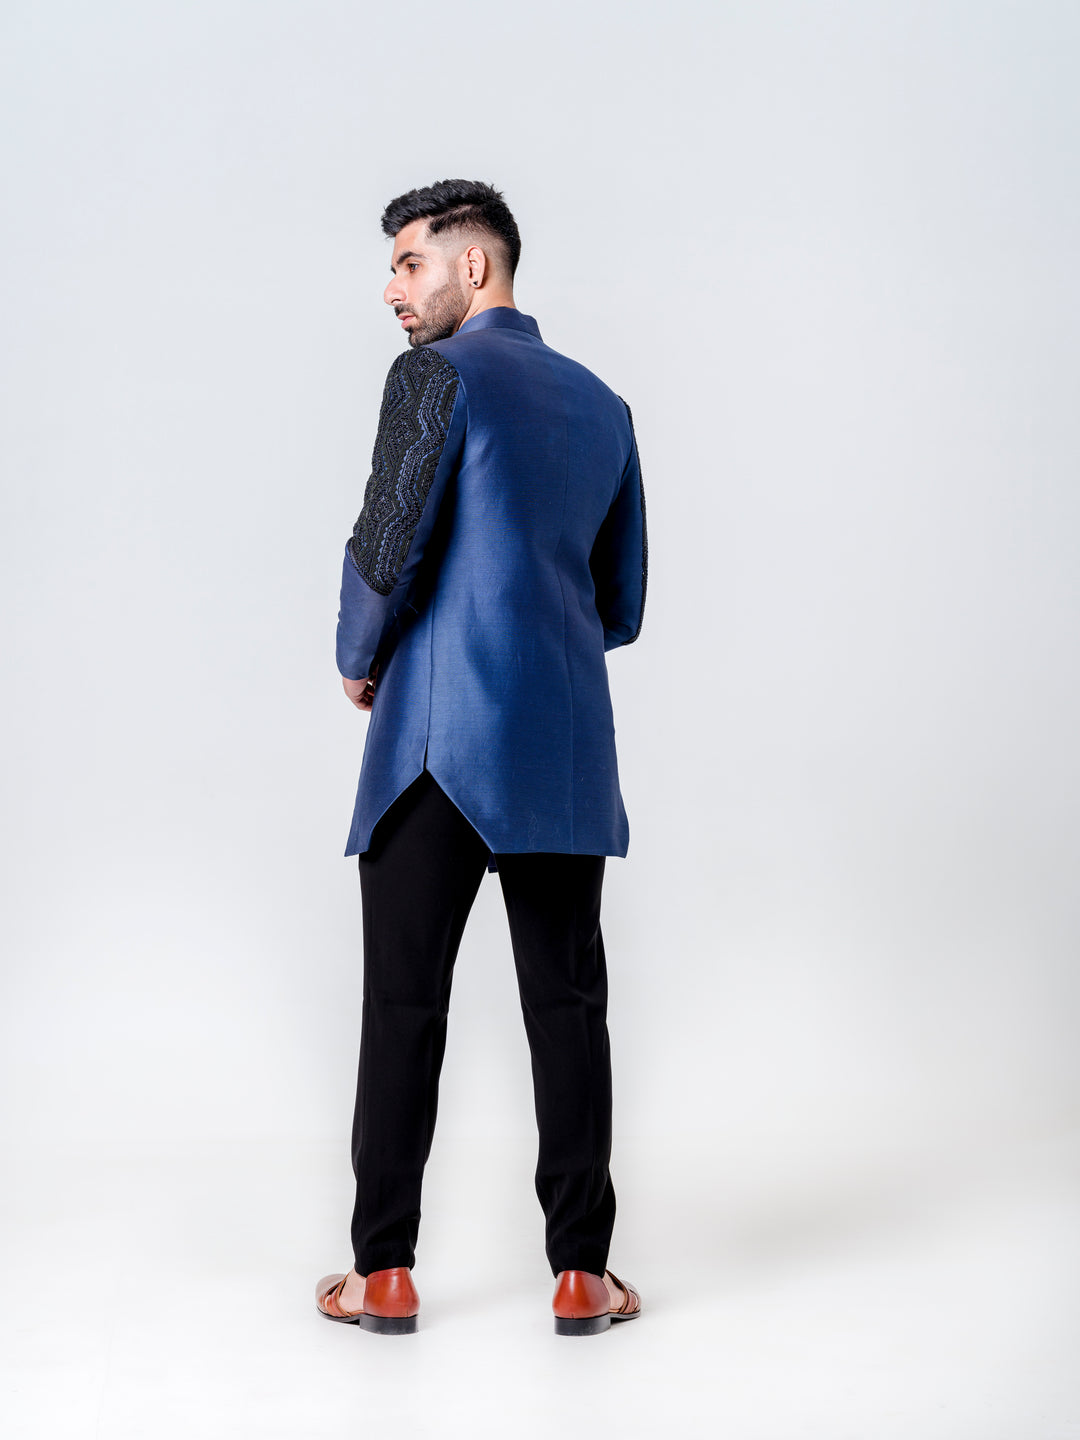 LONG OPEN JACKET ATTACHED NEHRU JACKET PAIRED WITH KURTA AND TROUSERS